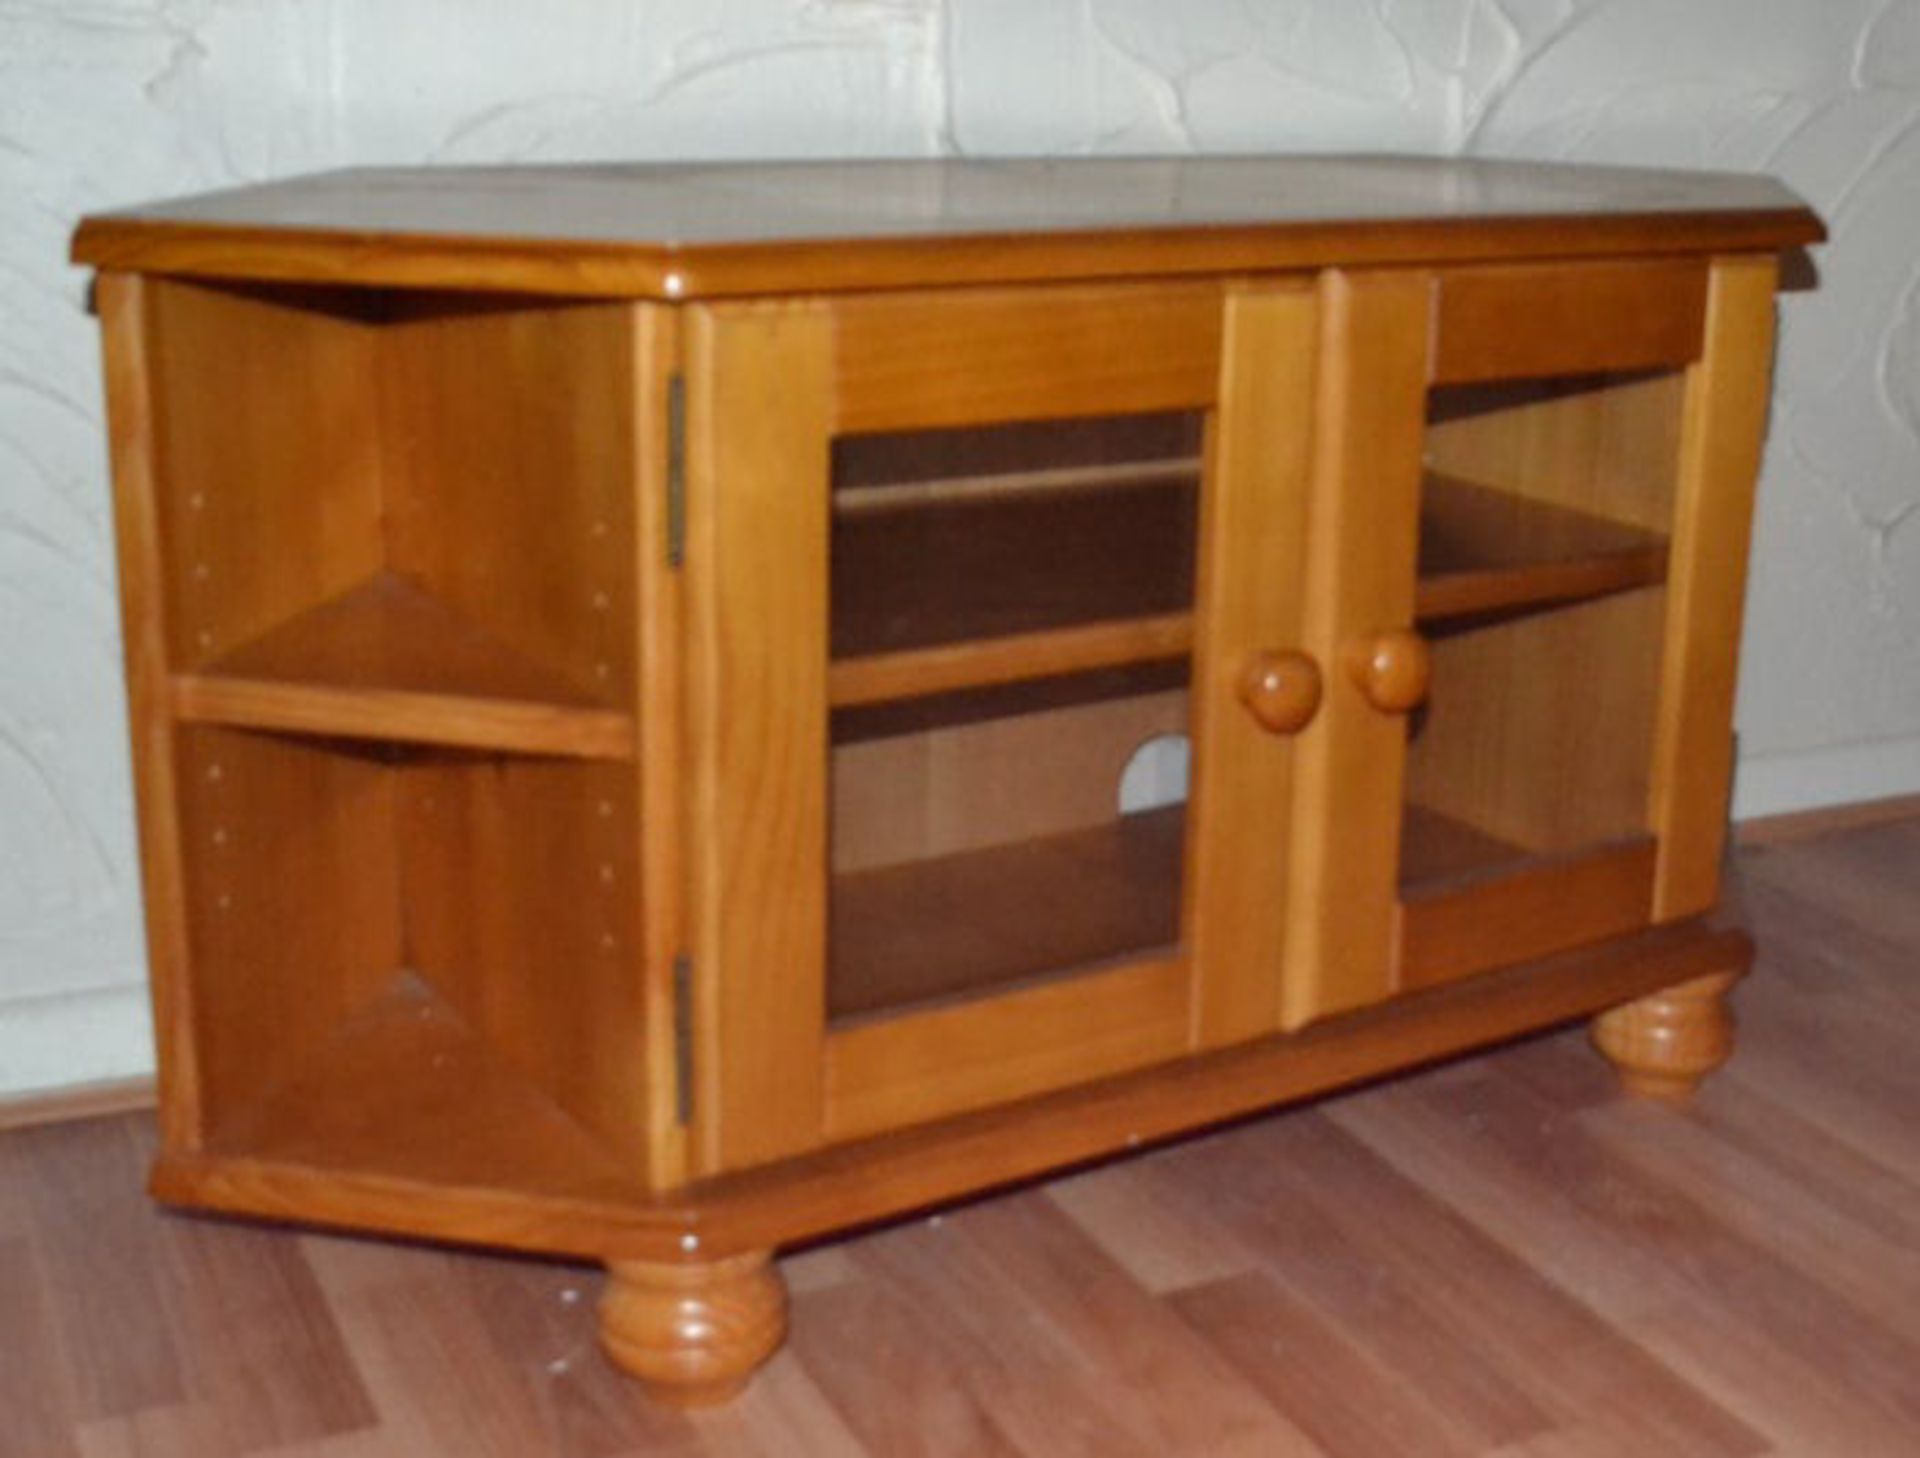 1 x Polished Pine Corner TV Unit with Double Glass Fronted Doors